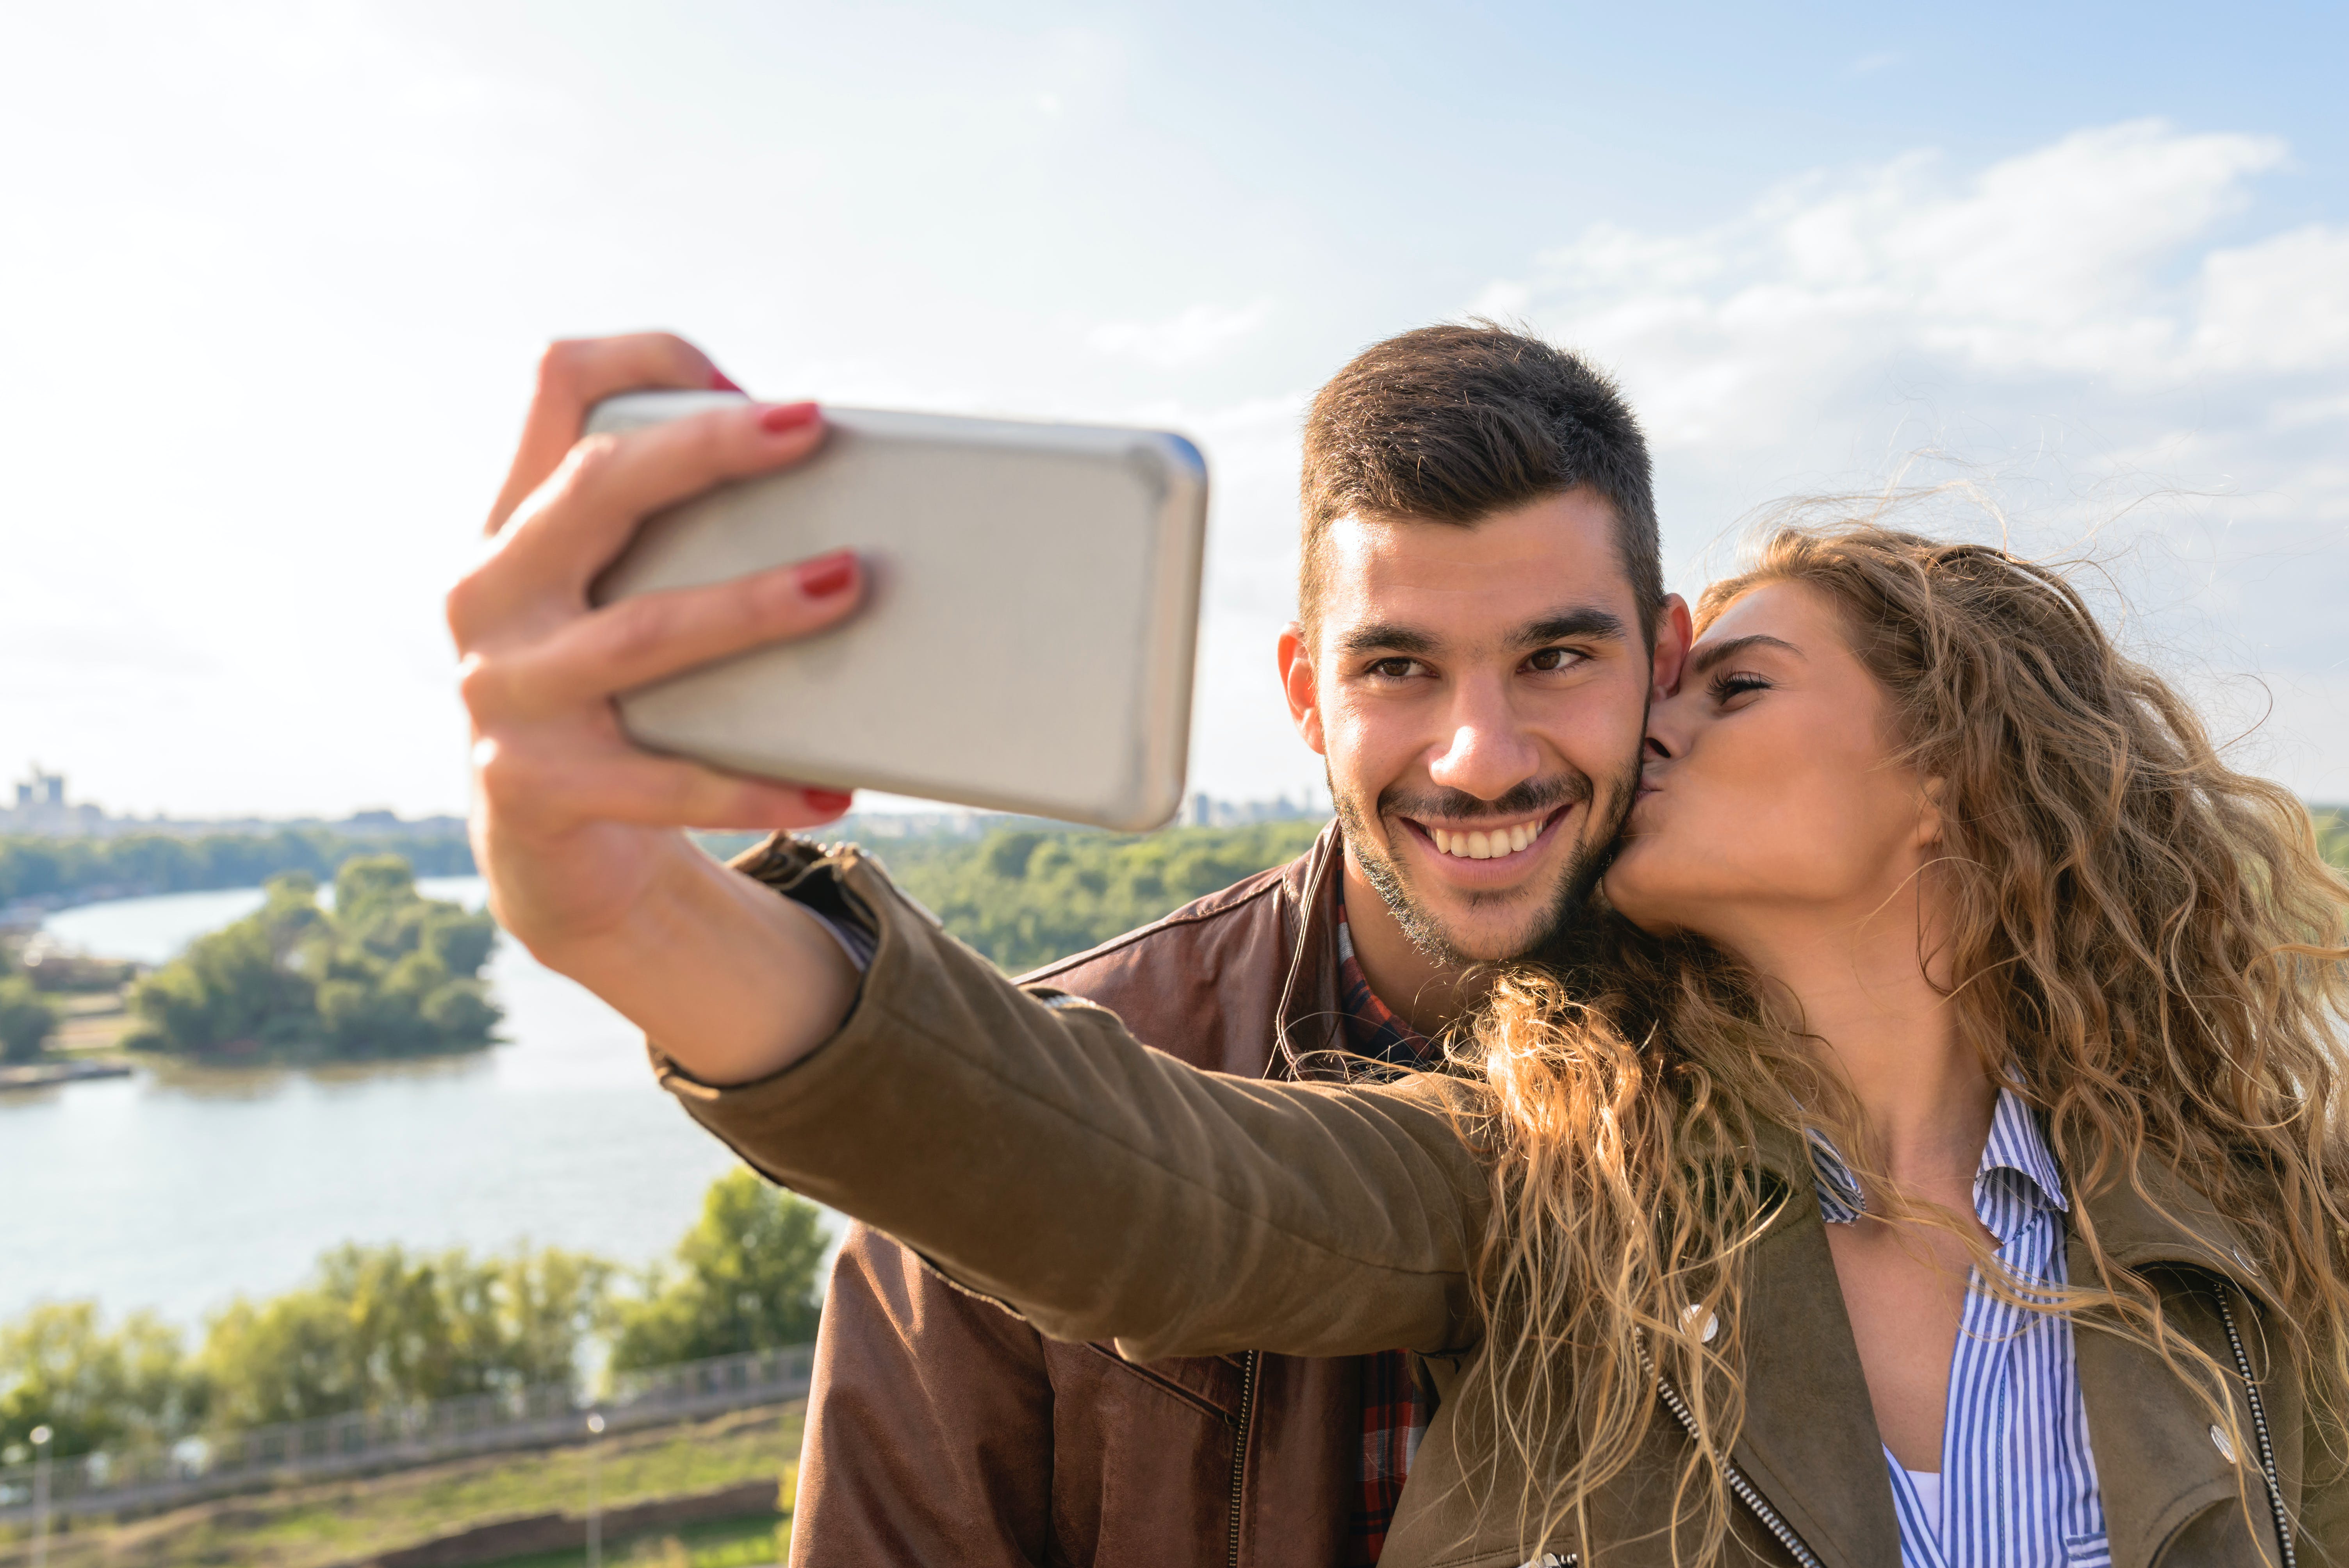 A happy couple posing for a photo together | Source: Pexels